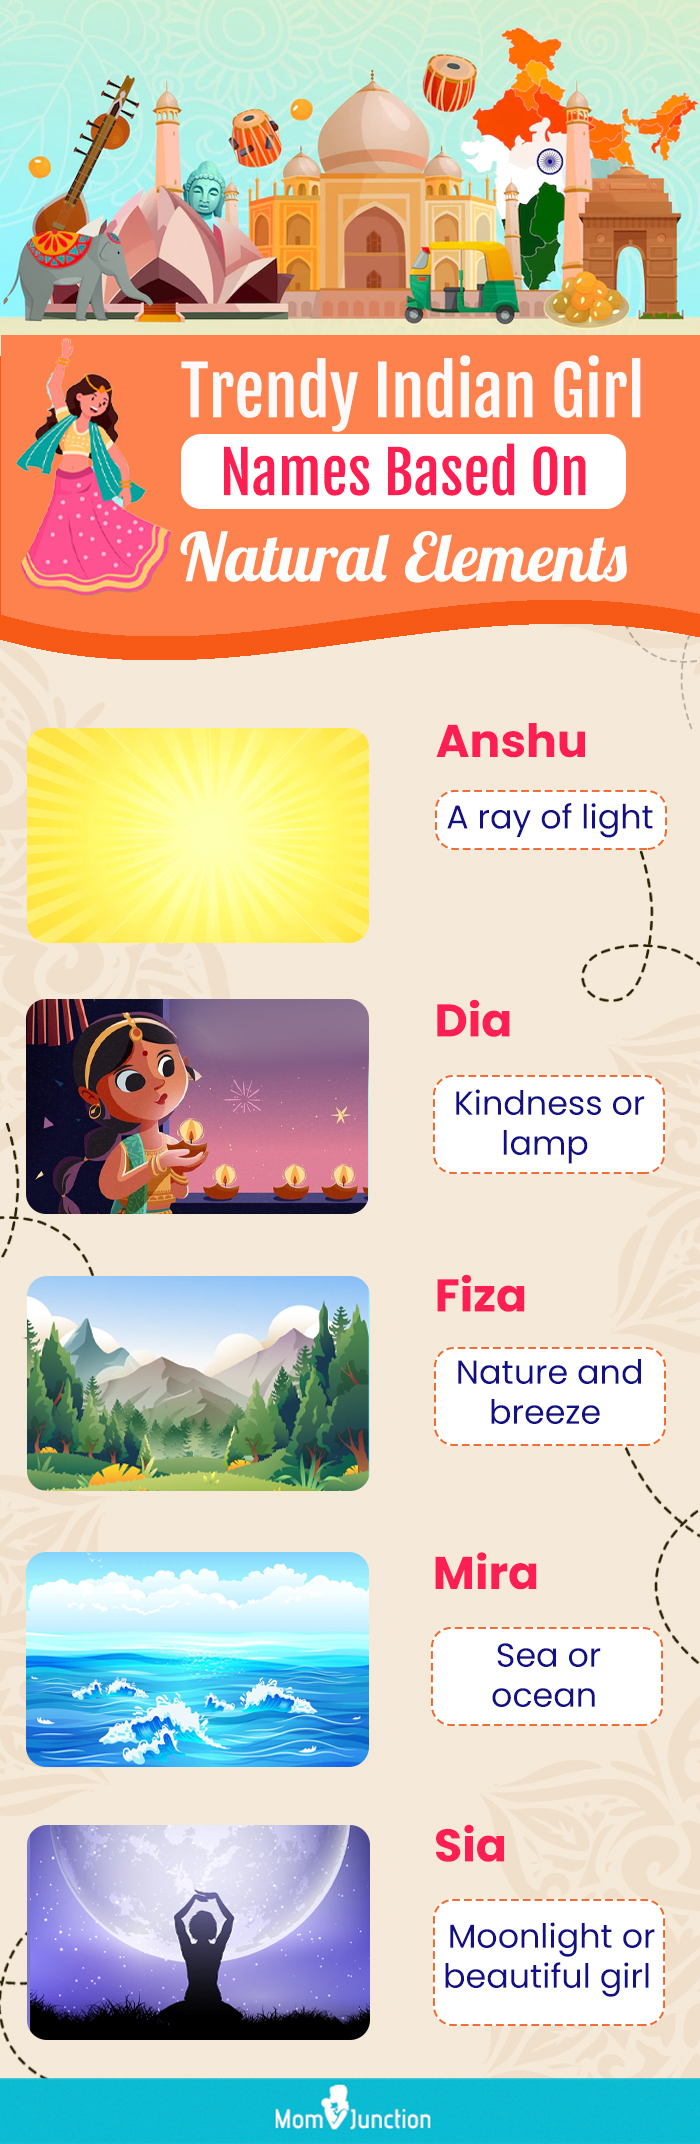 trendy indian girl names based on natural elements (infographic)